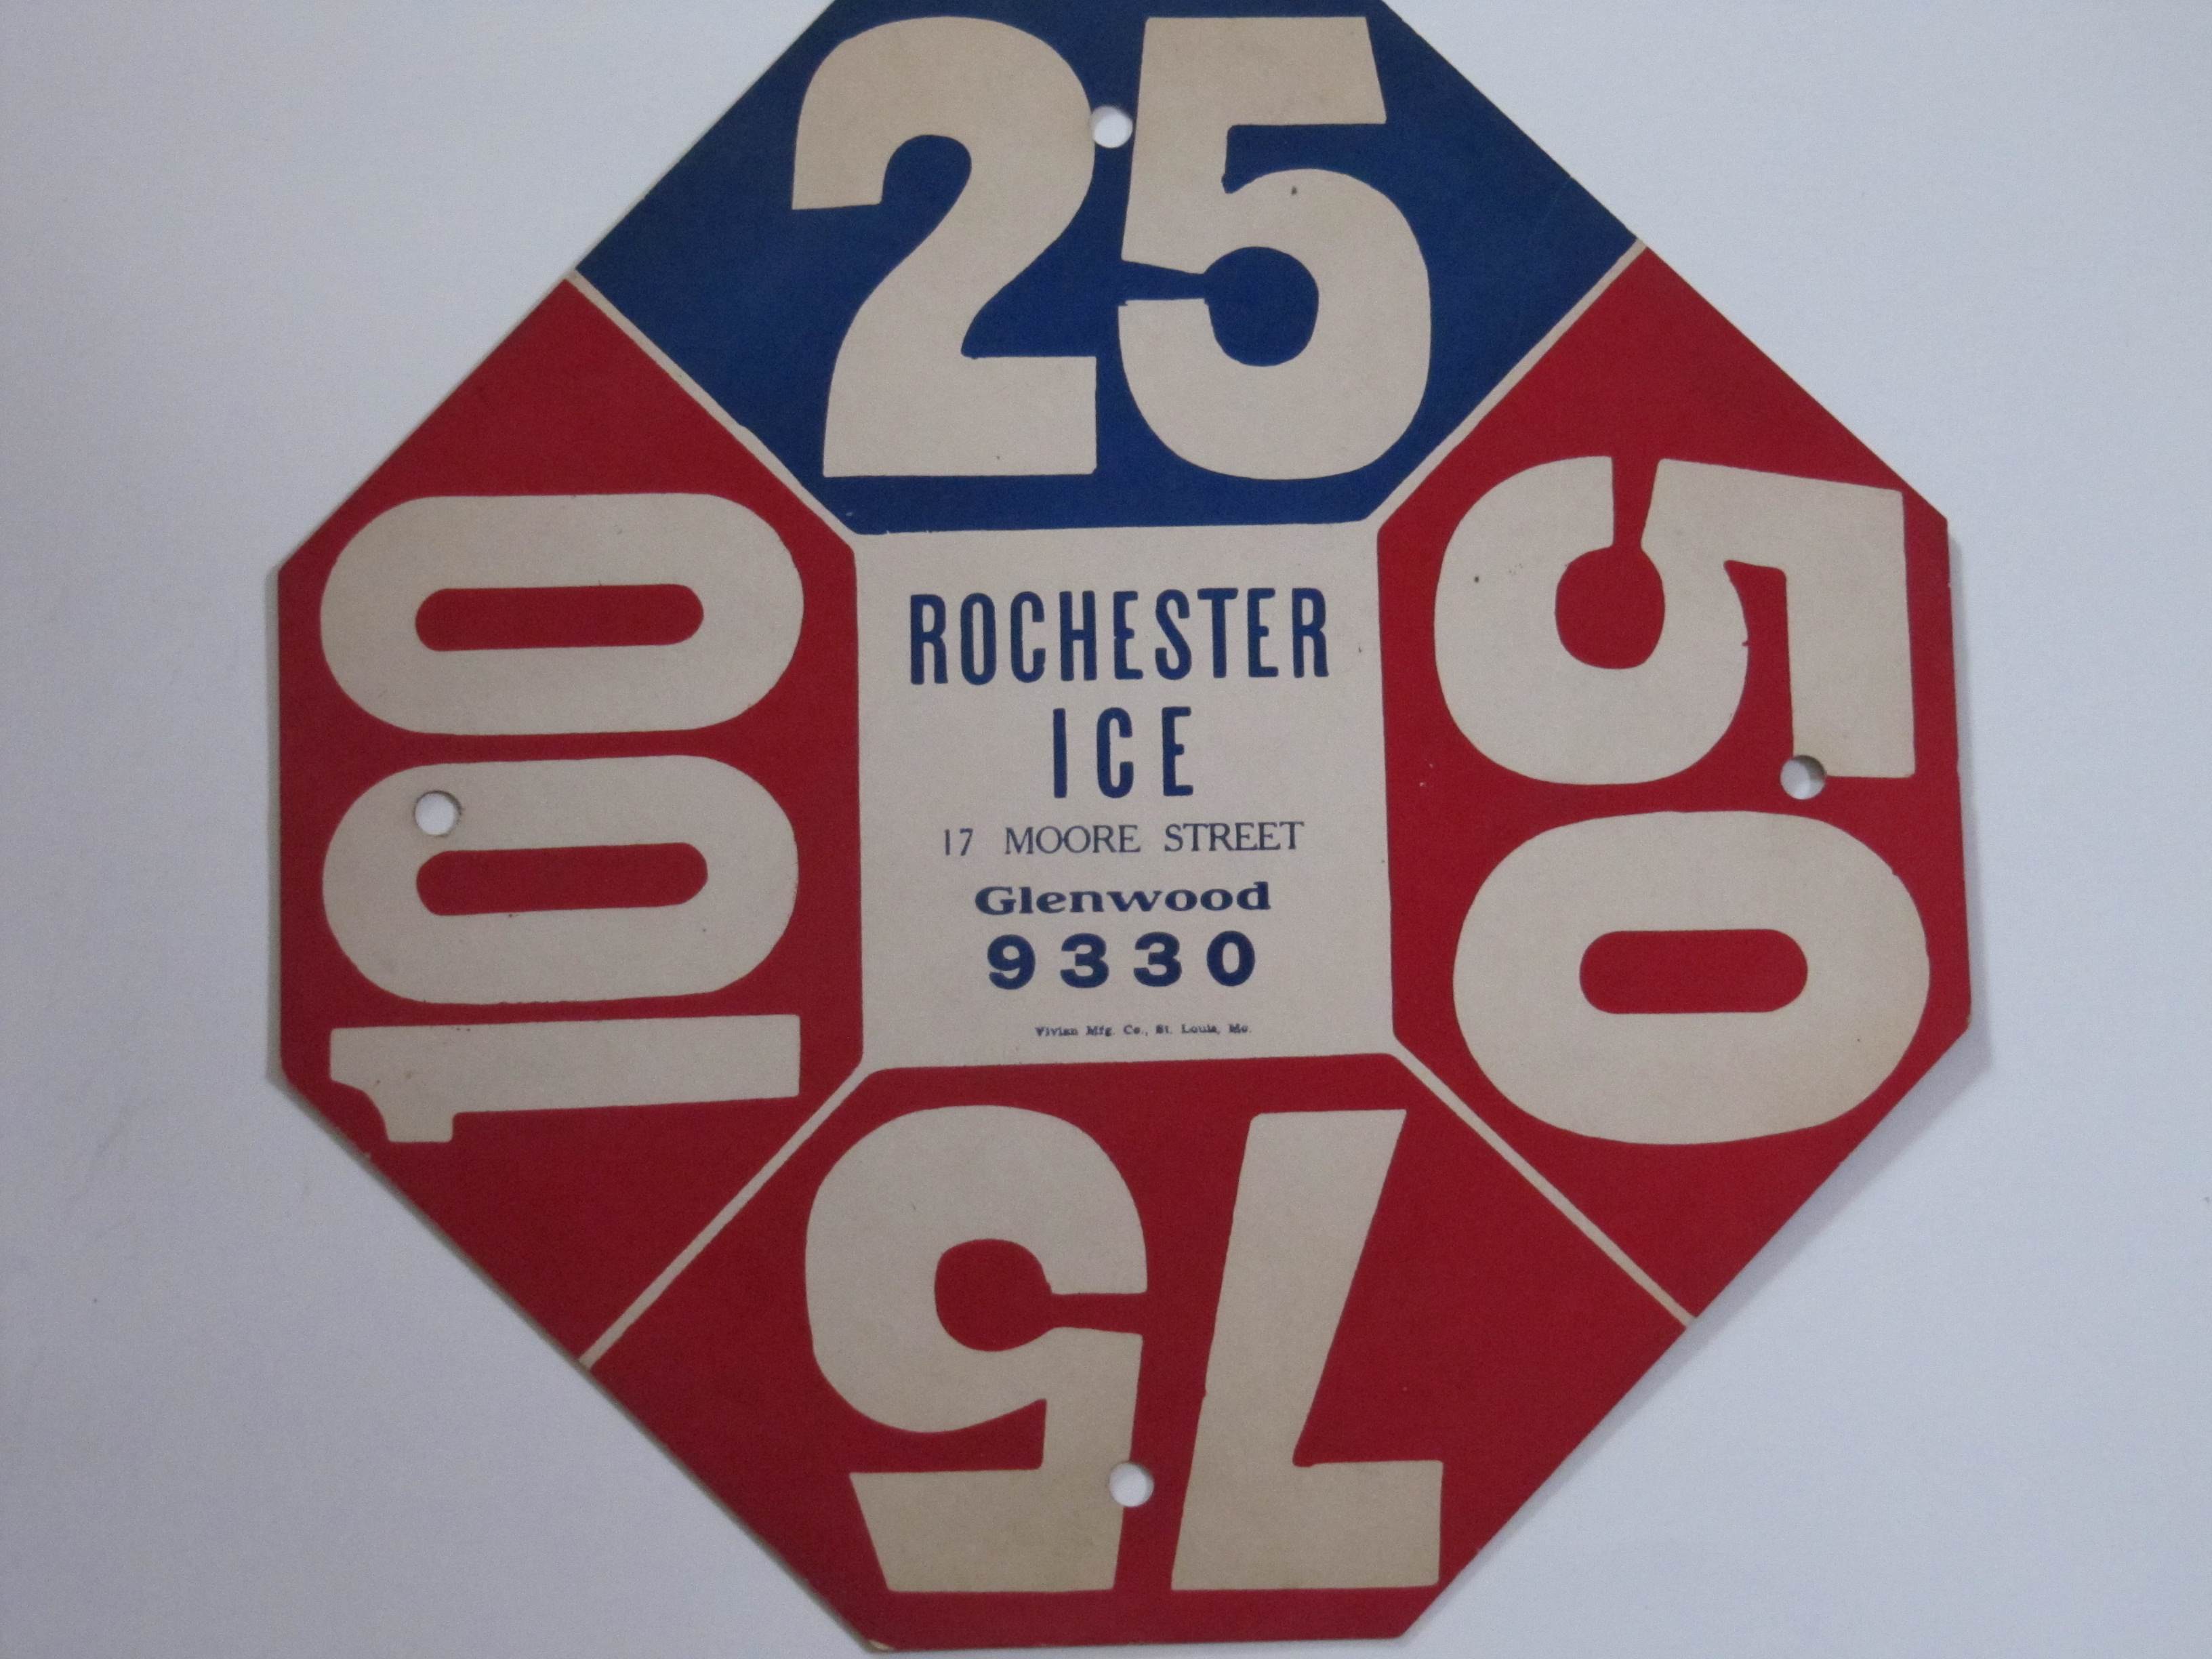 Rochester Ice Co.